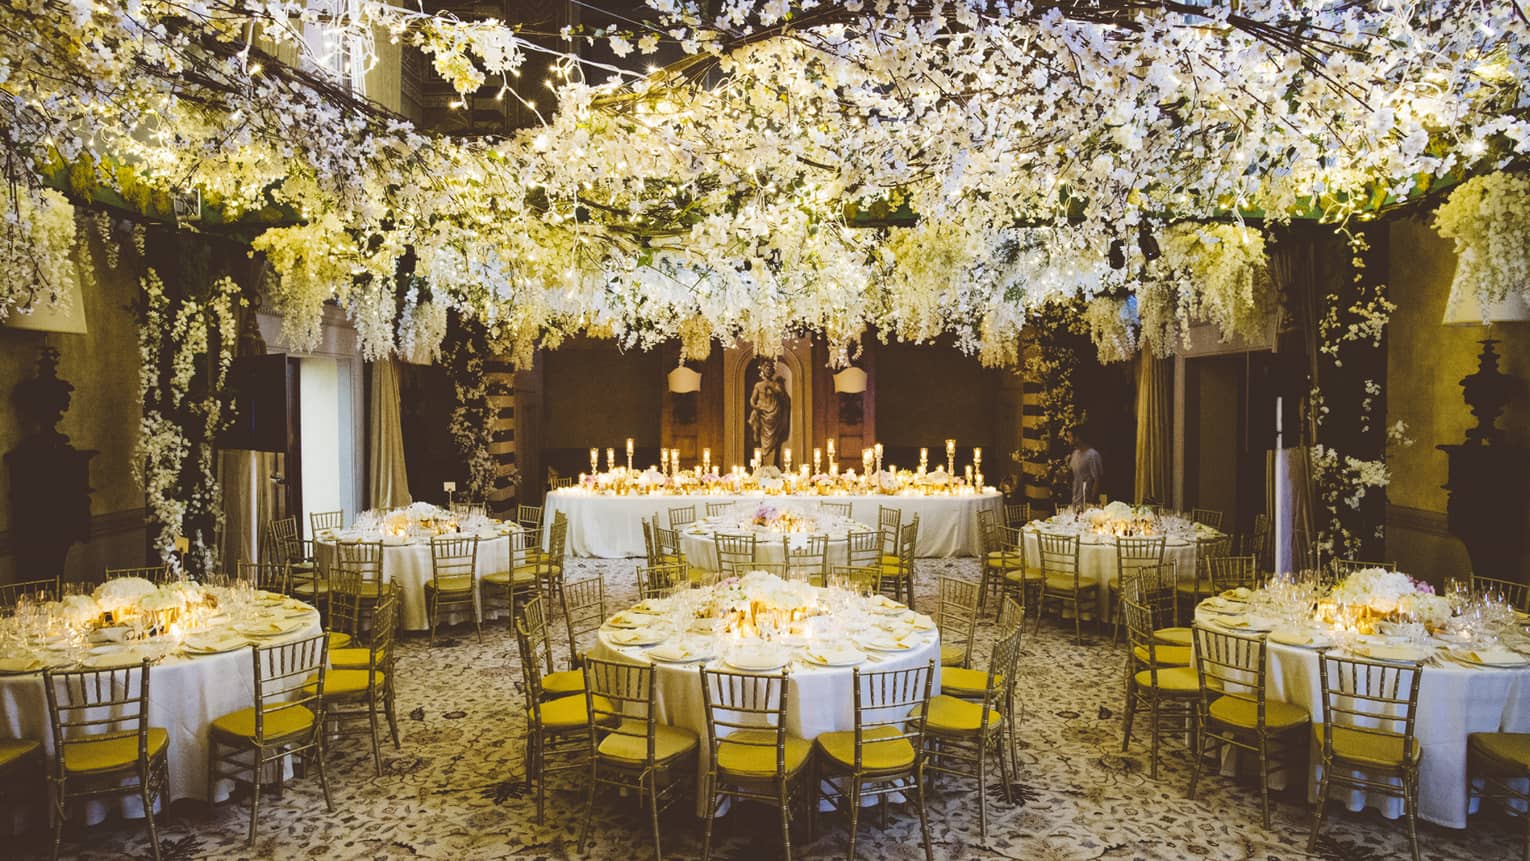 A white floral installation hangs from the ceiling over circular tables are set with white table cloths, brown wooden chairs with yellow seats 